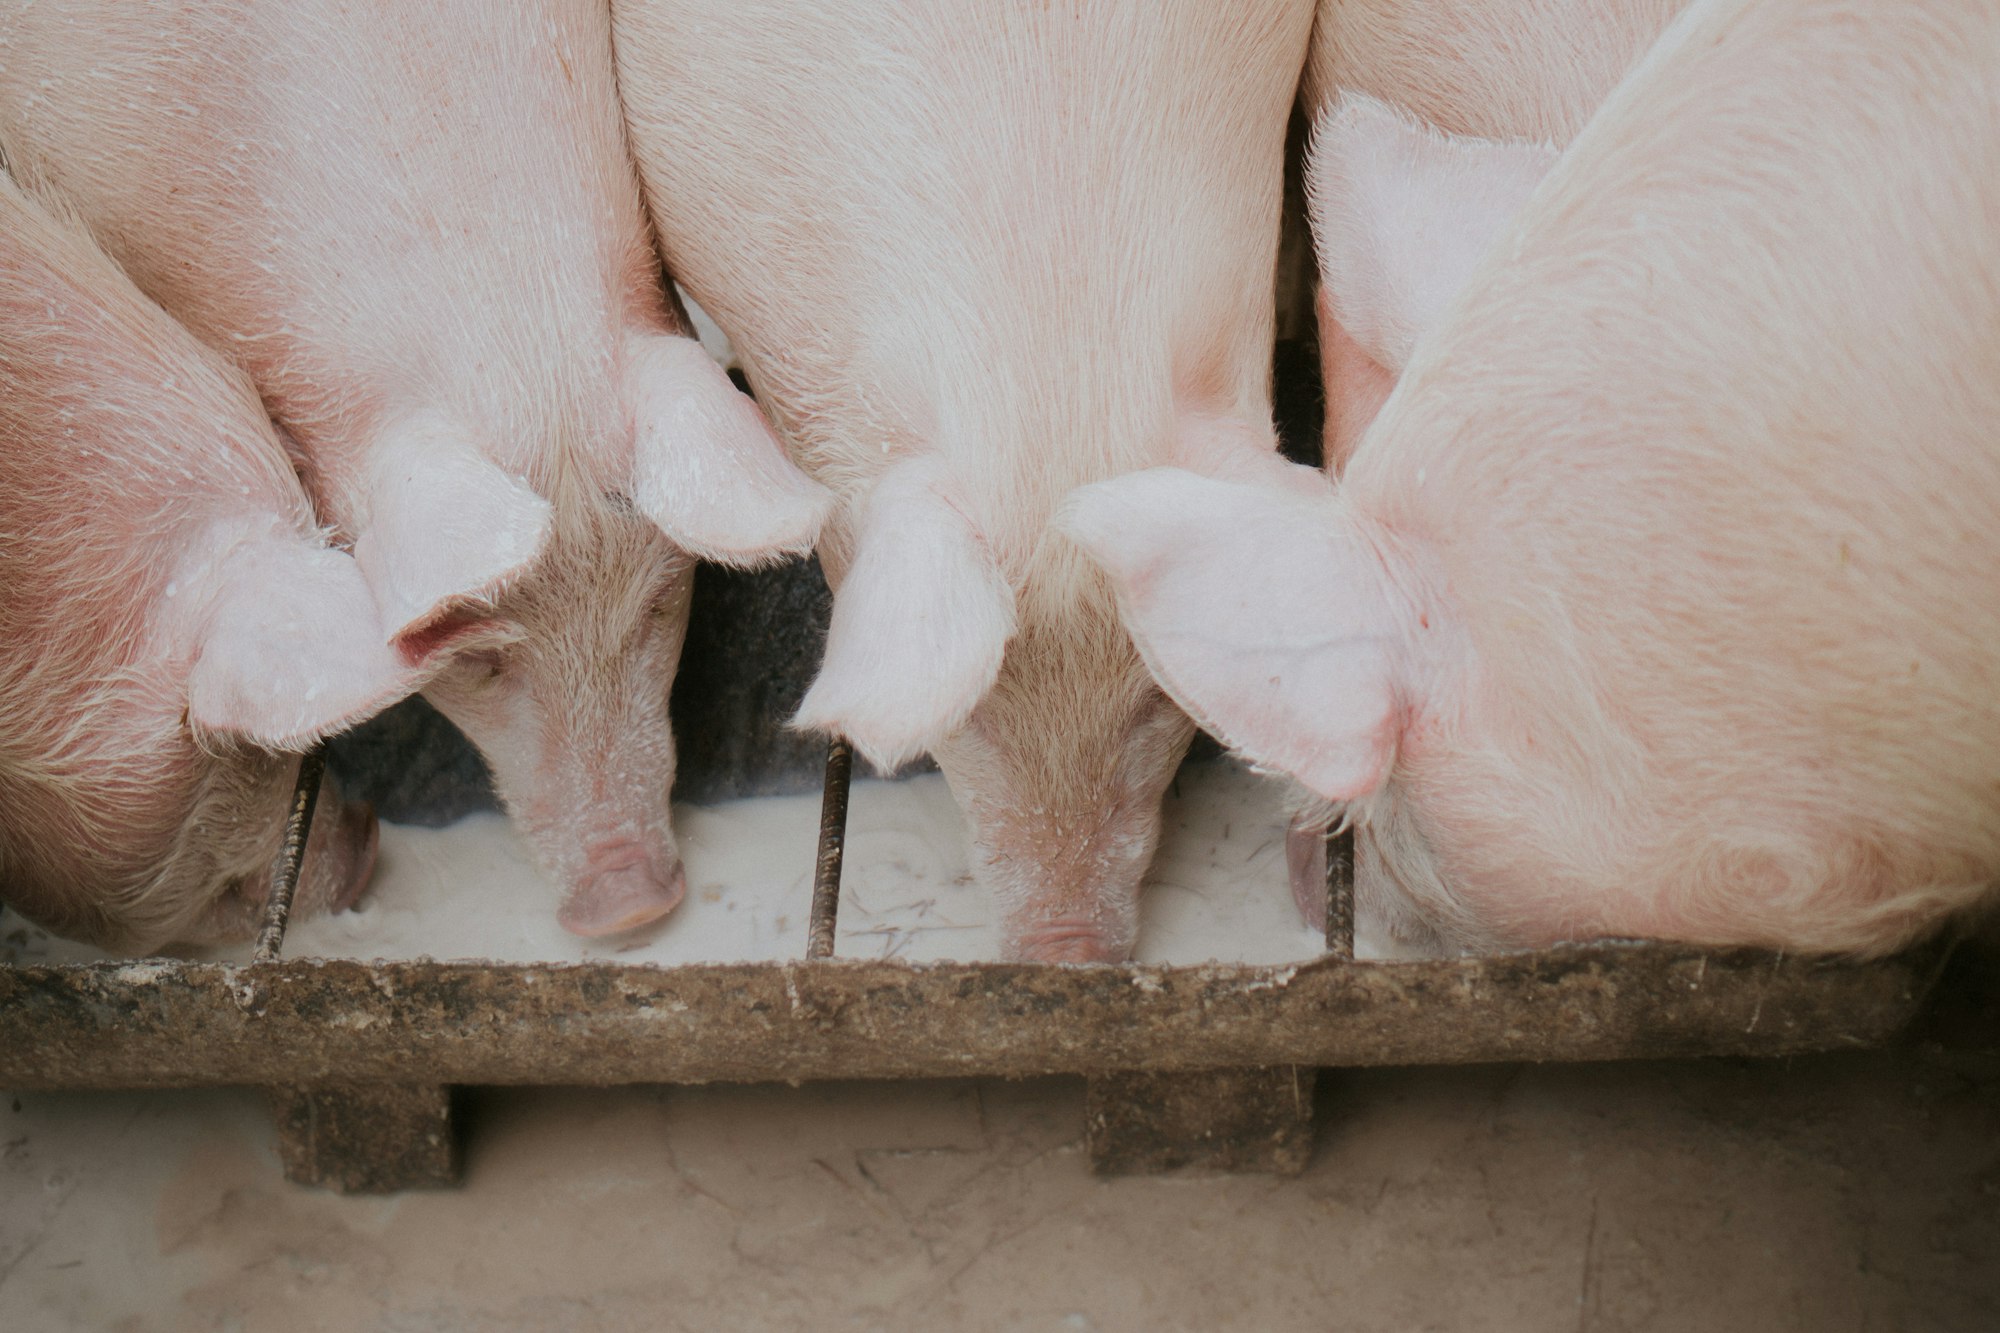 Why a local group is trying to stop a proposed pork plant